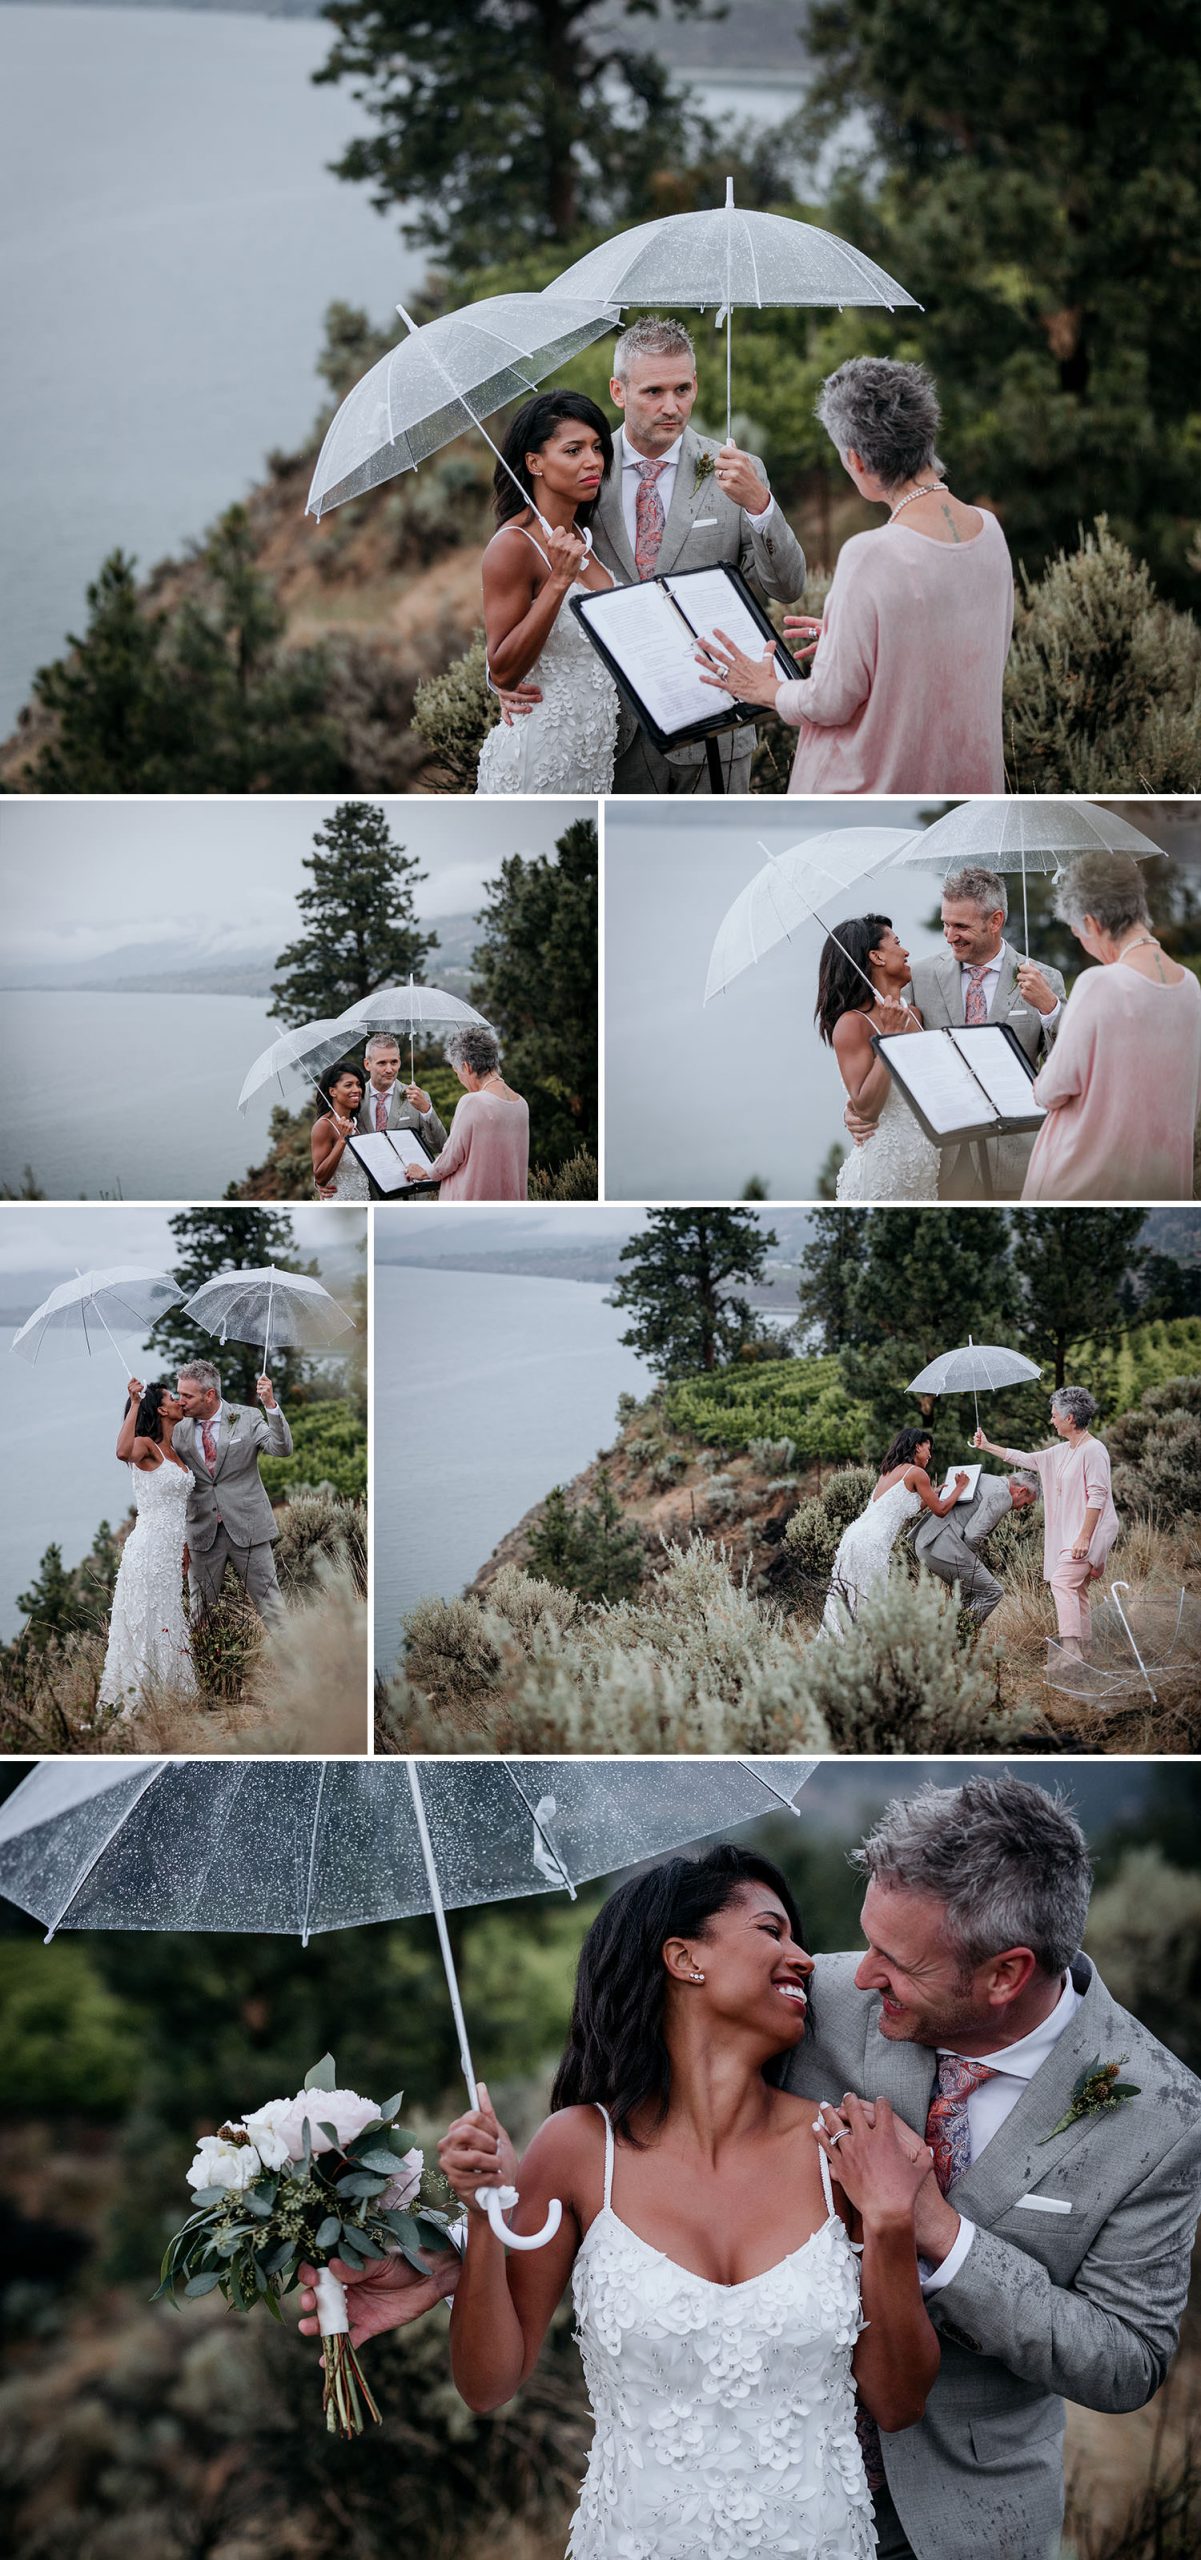 Awesome wedding elopement ceremony on a cliff above lake.